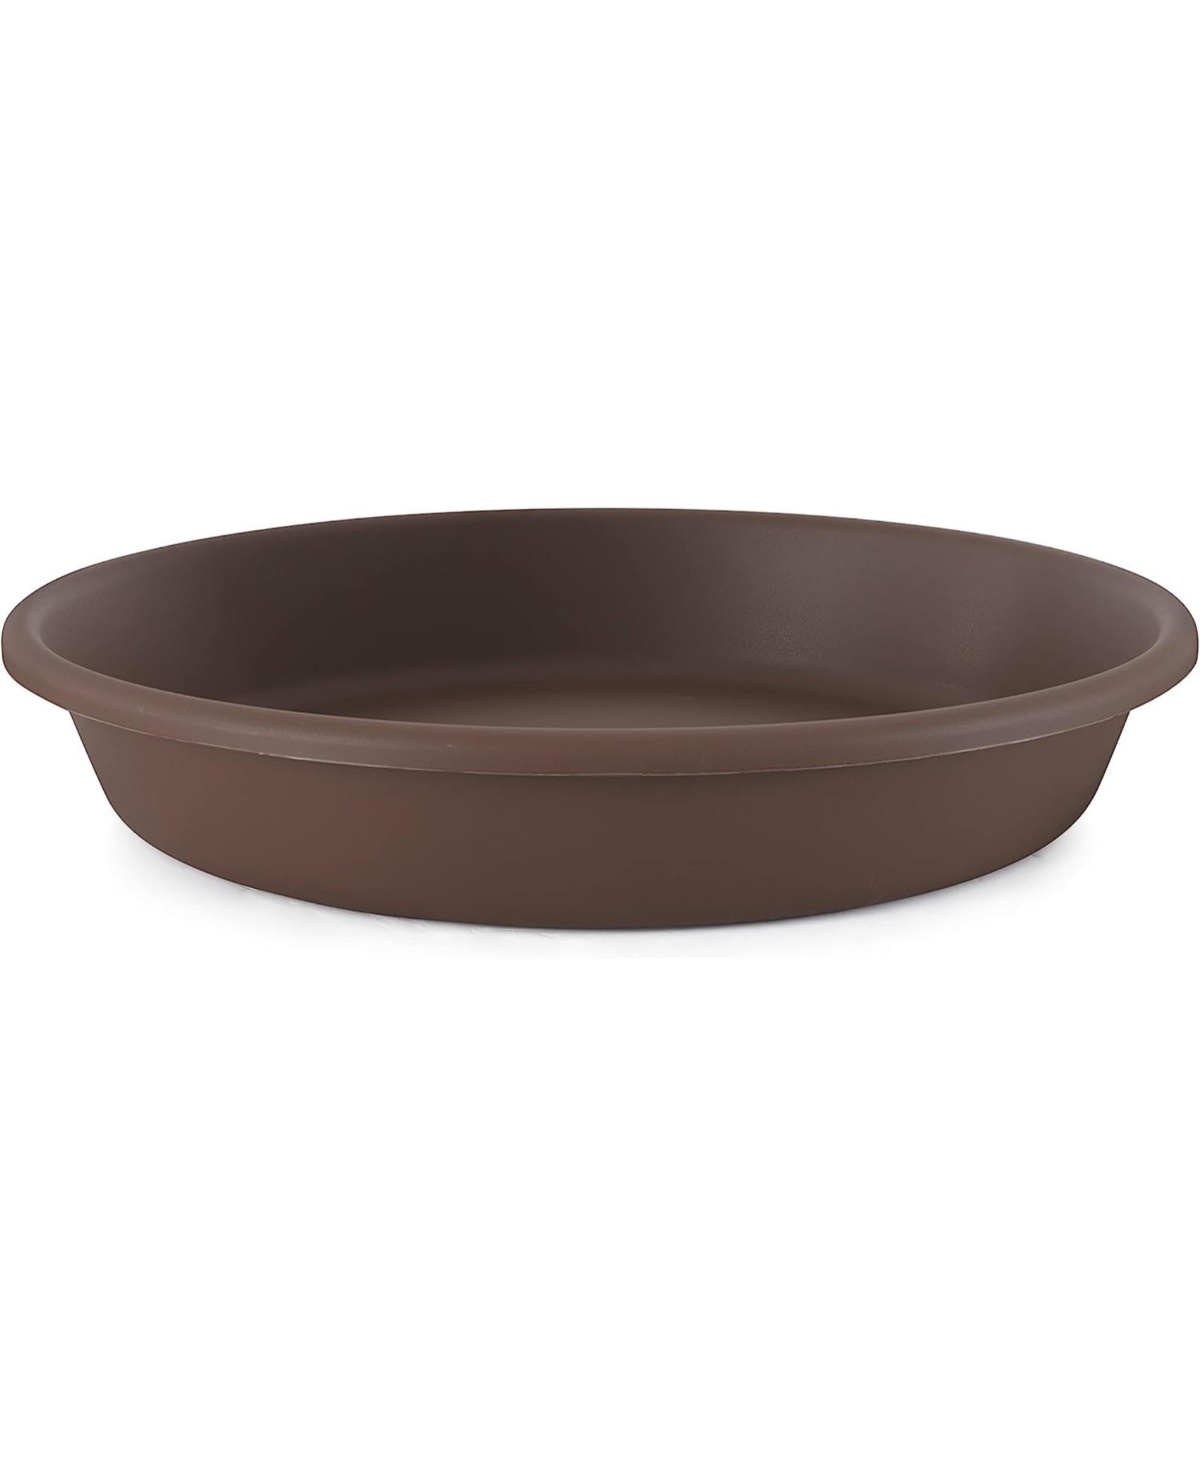 Deep Saucer for Classic Pot Plastic, Chocolate, 21 Inches - Chocolate